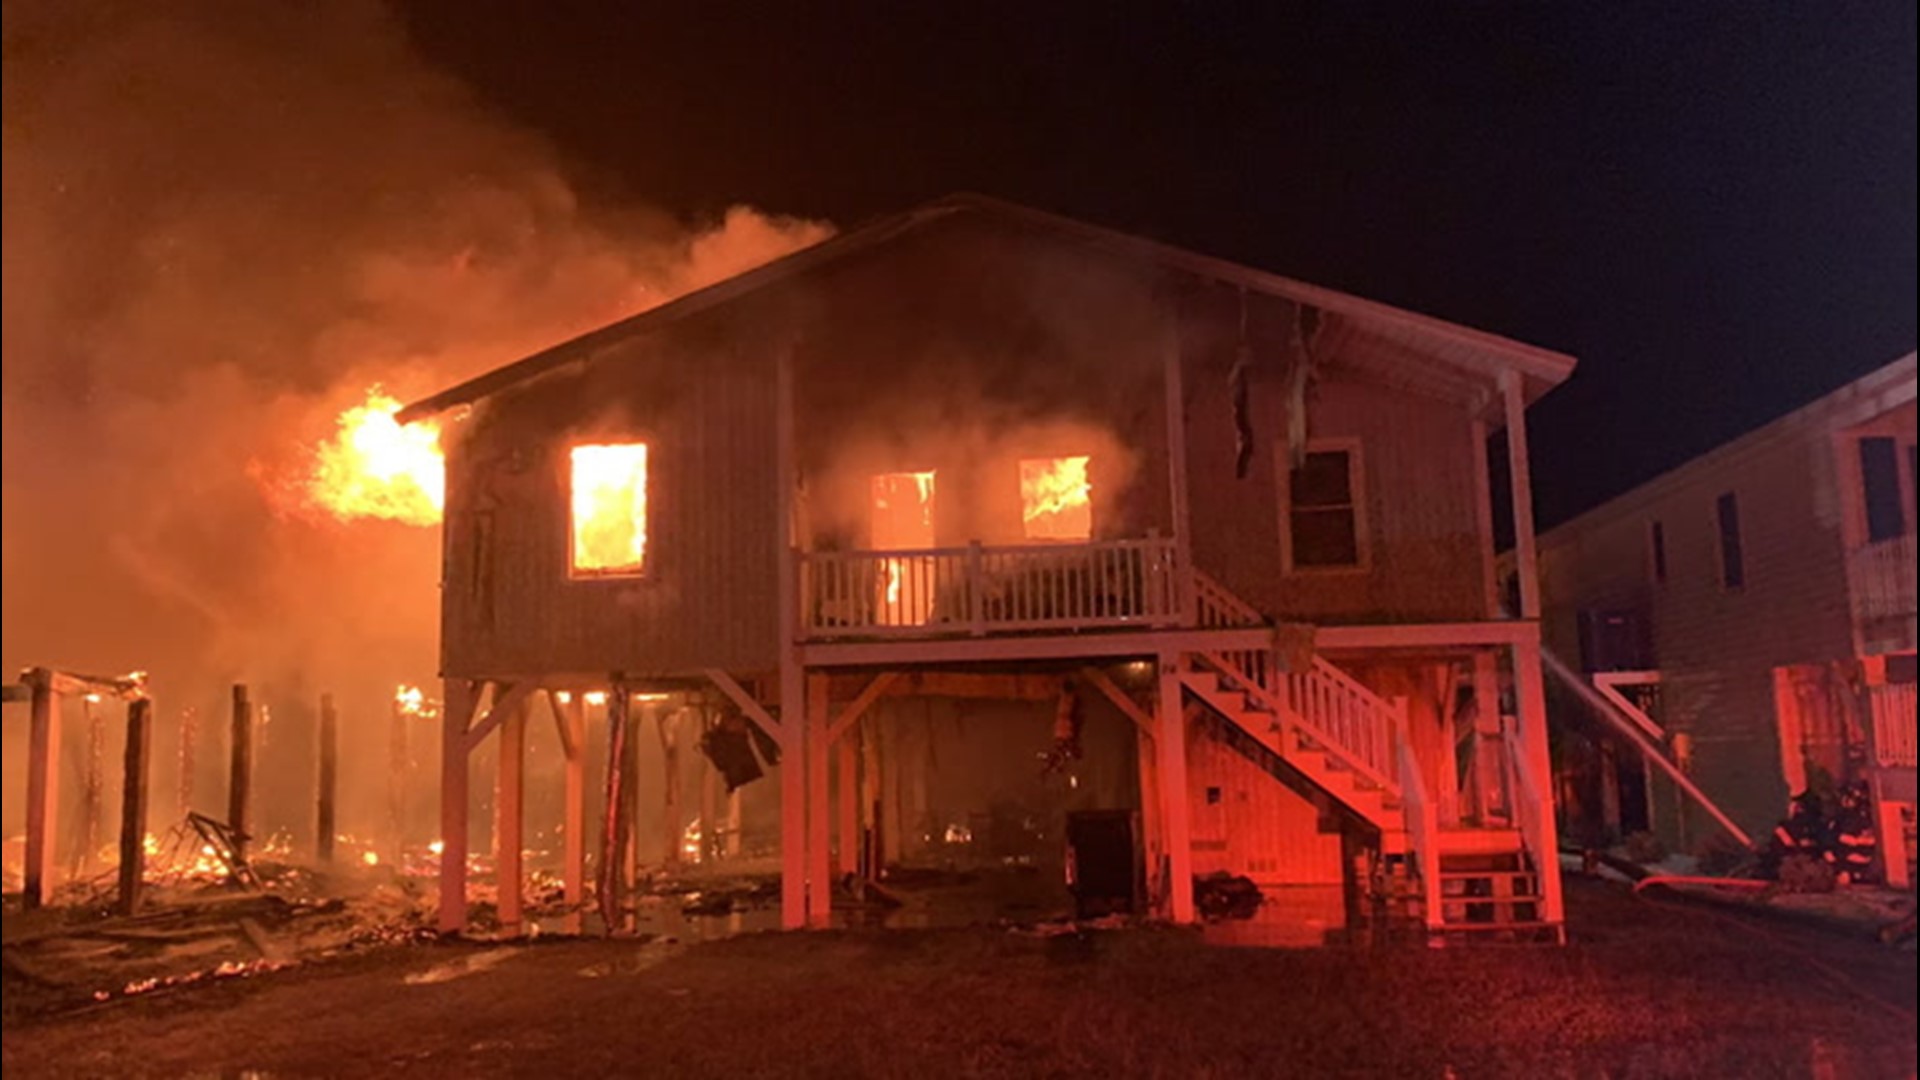 Authorities said a second fire sparked in Ocean Isle Beach on Aug. 6. The community experienced a large fire when Hurricane Isaias made landfall.